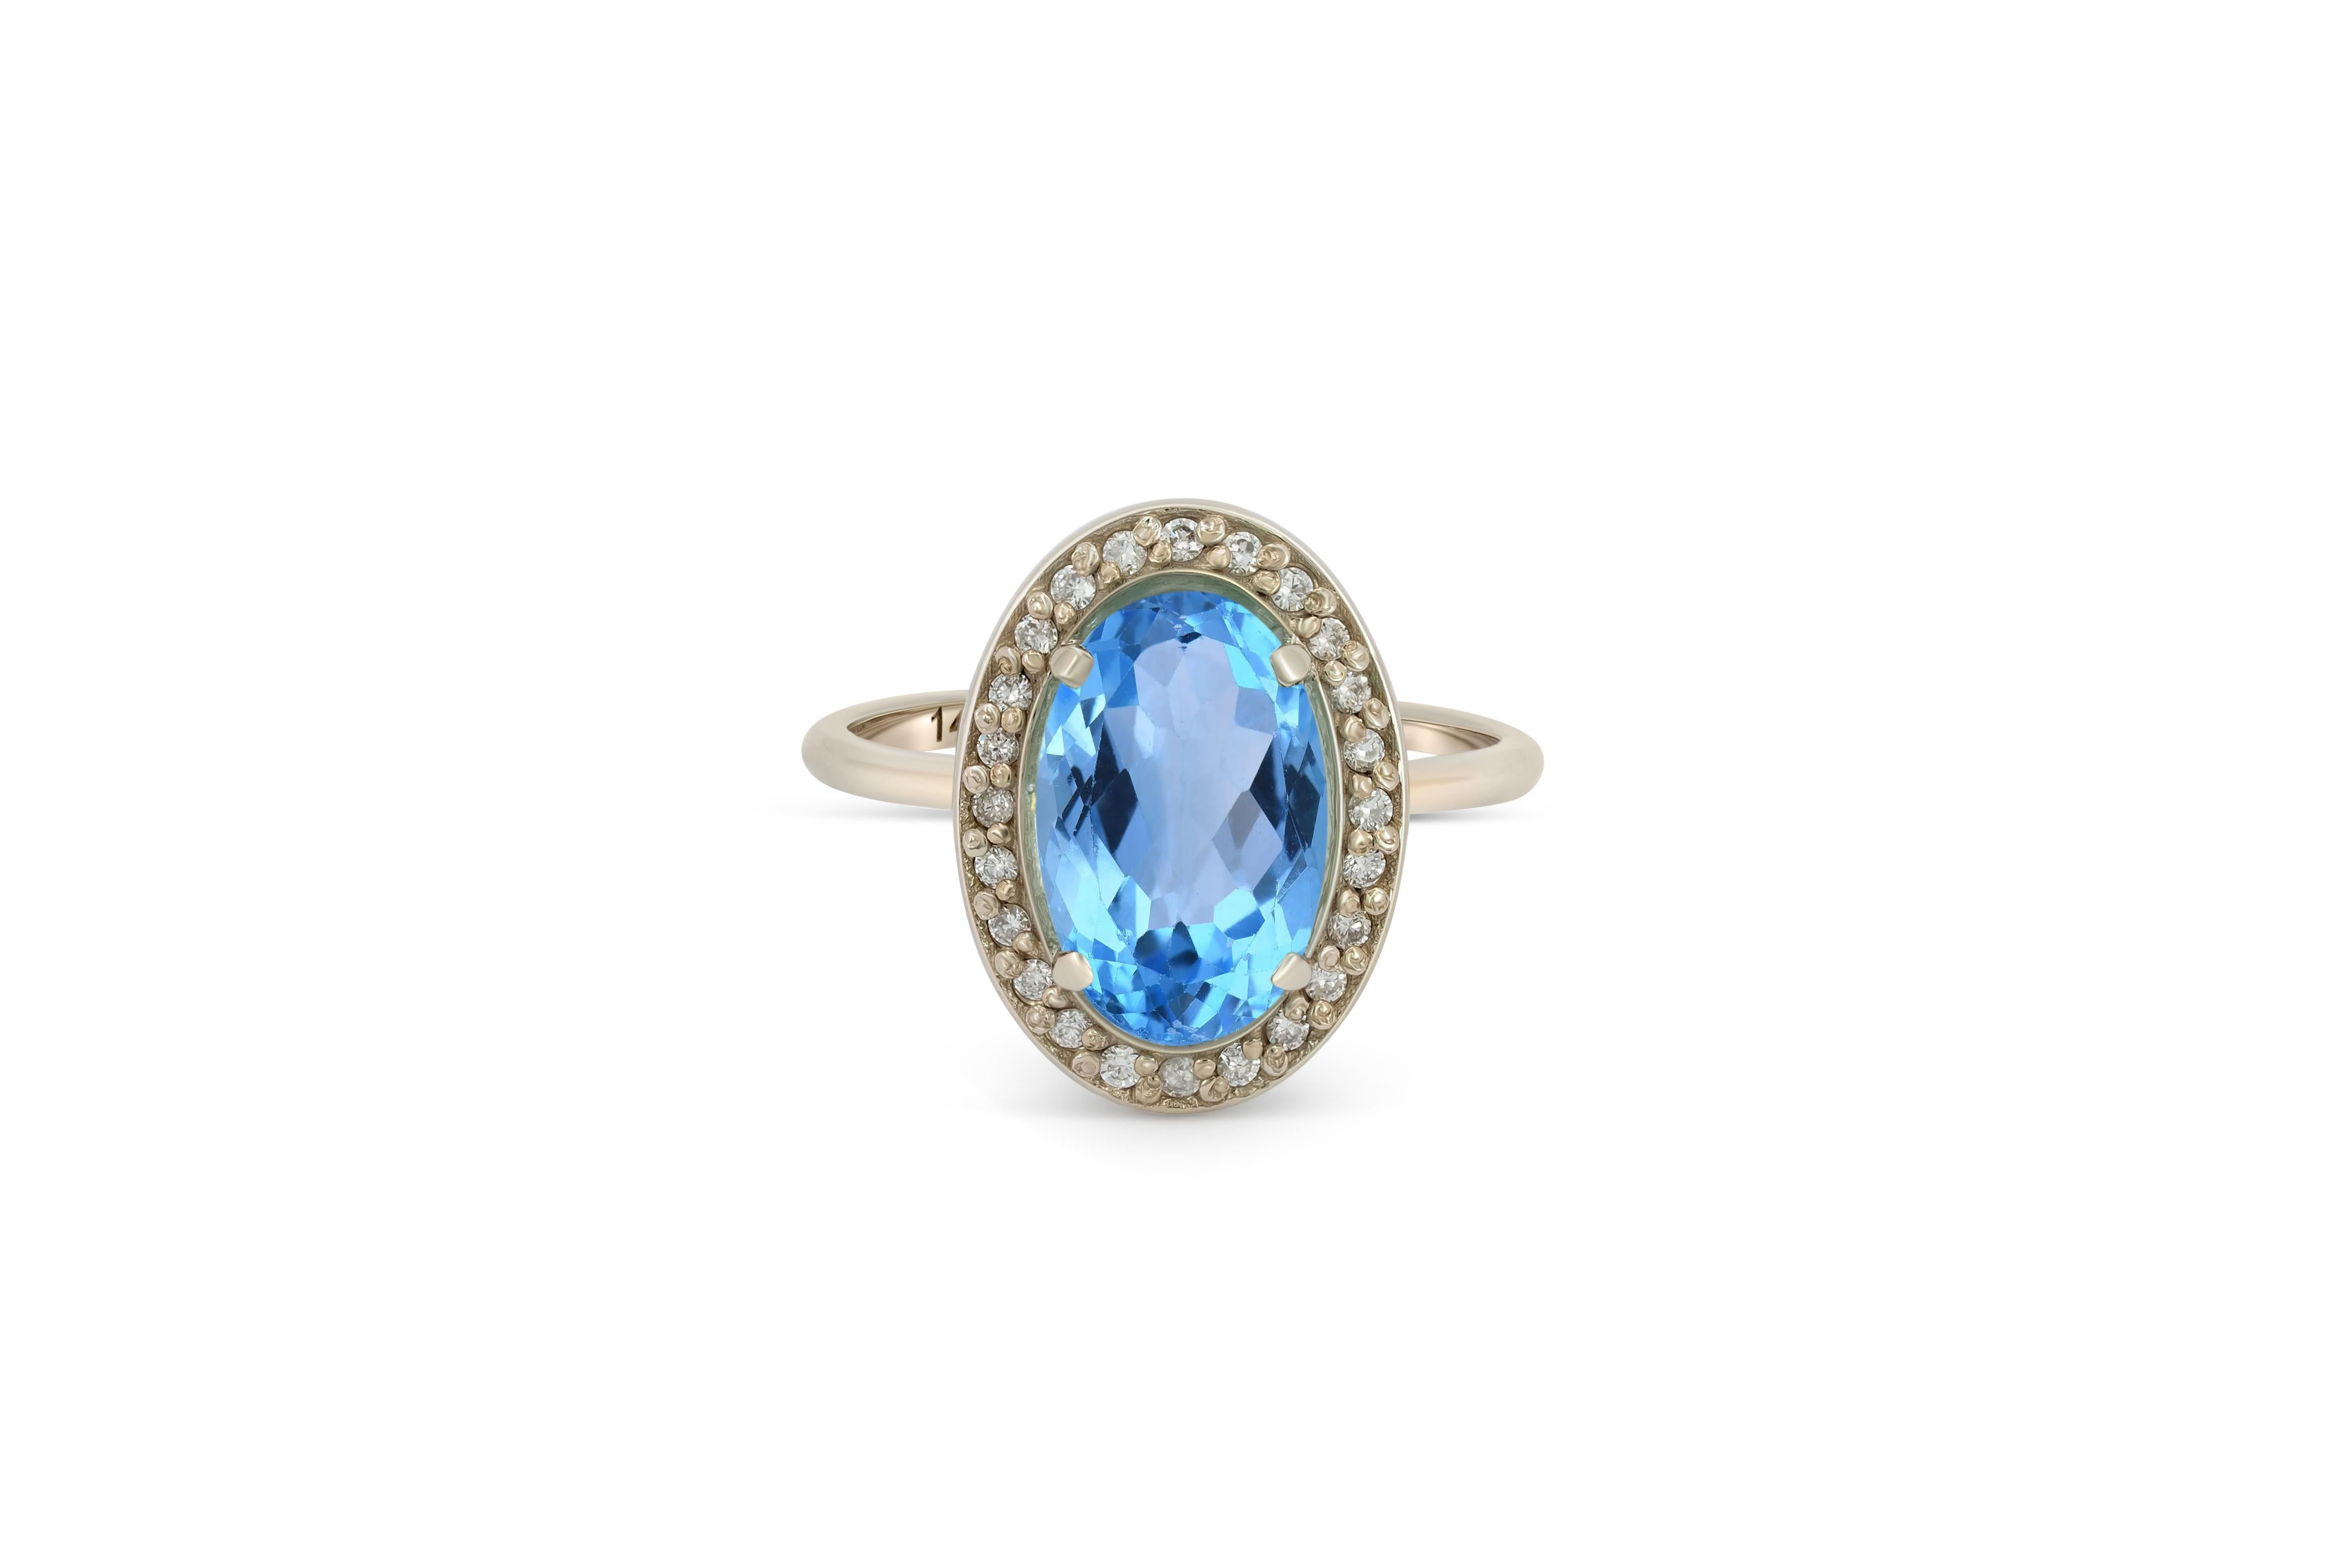 For Sale:  Topaz and diamonds 14k gold ring. 3